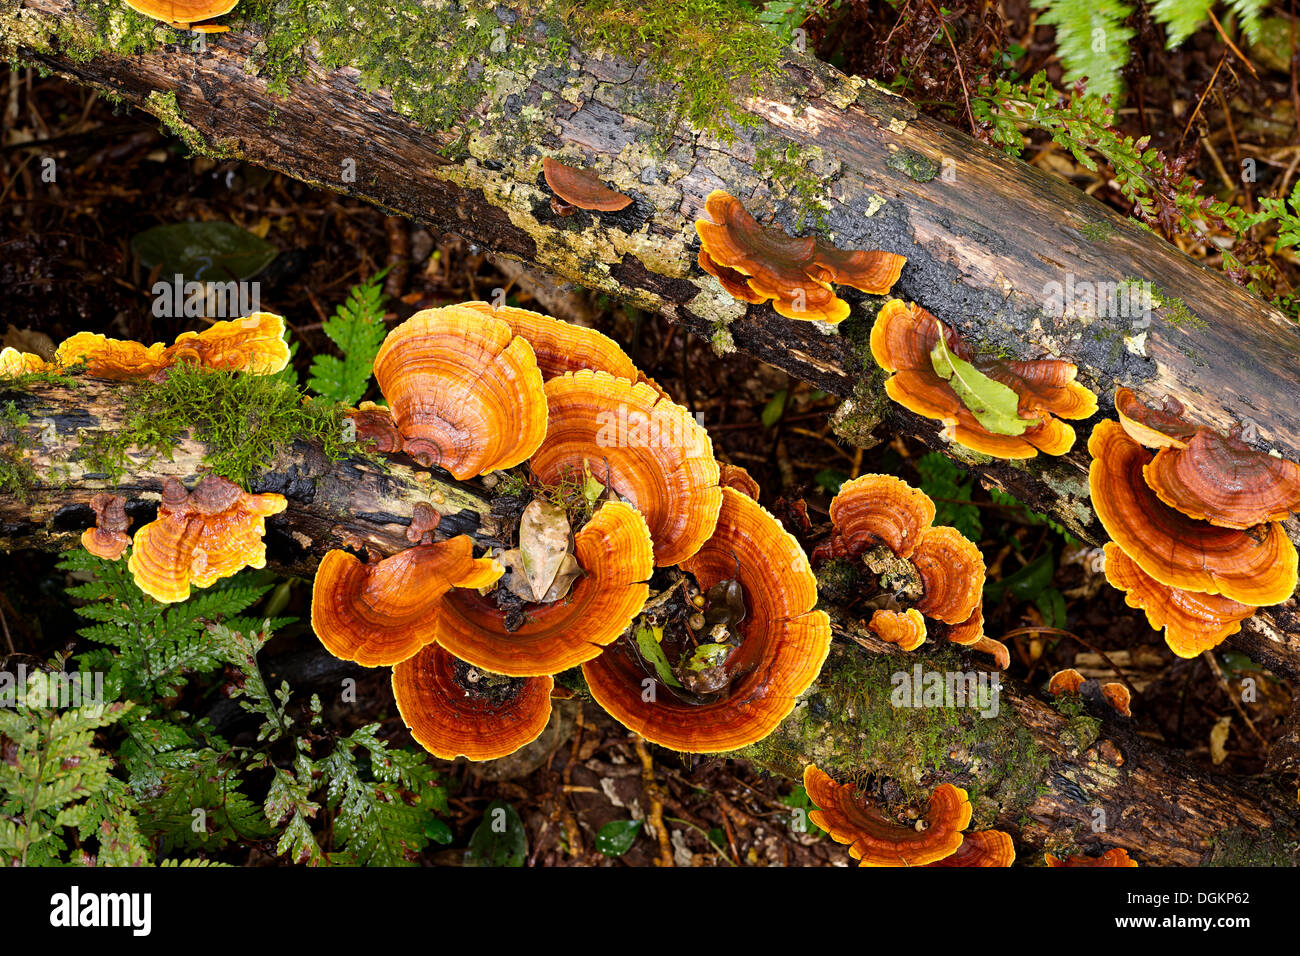 Unidentified orange coloured bracket fungi growing on decaying timber. Queensland rainforest. Stock Photo